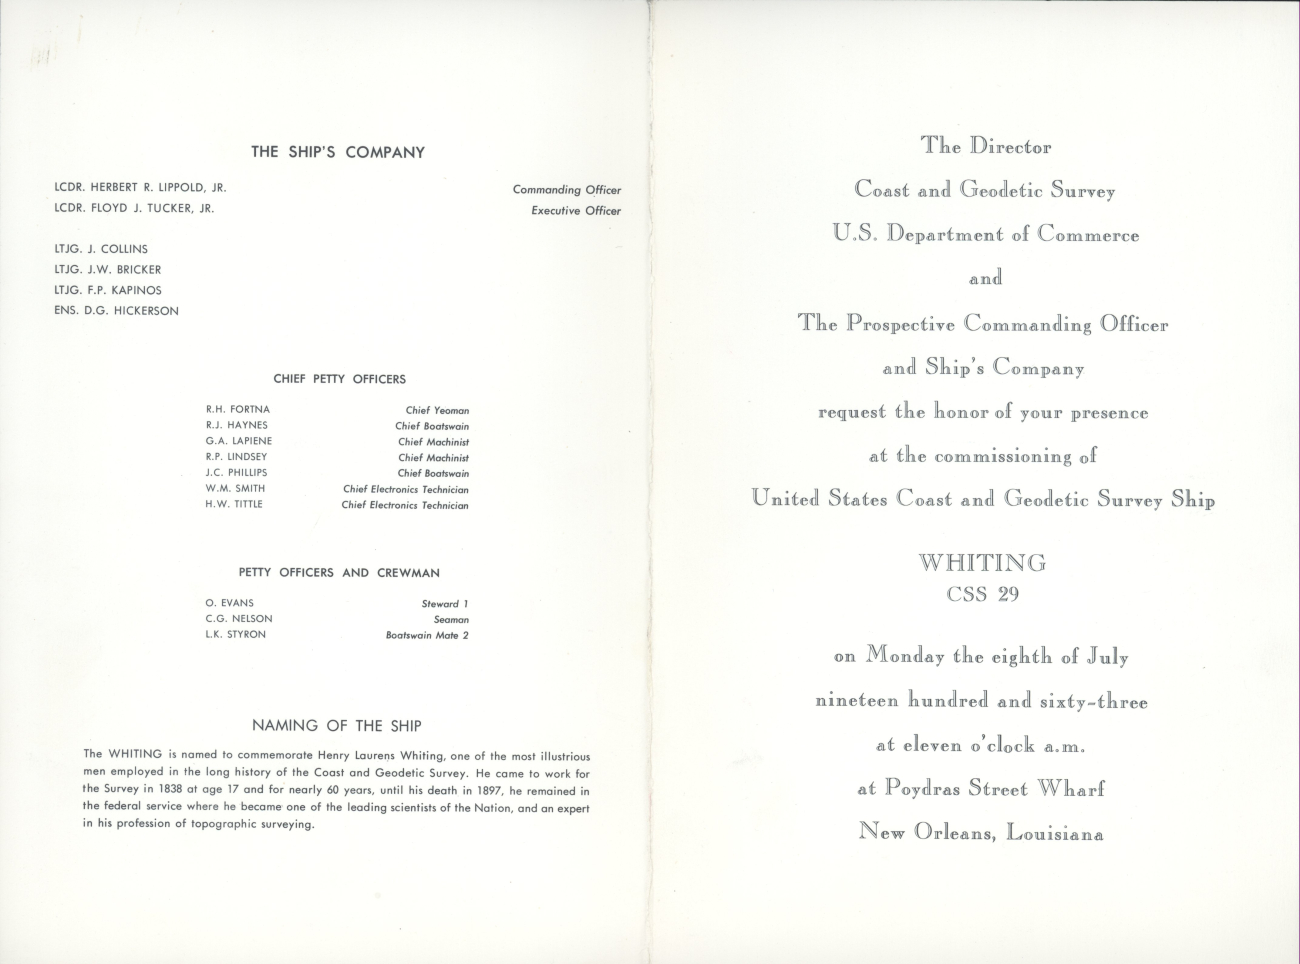 Invitation to commissioning ceremony of USC&GS; Ship WHITING on July 8, 1963